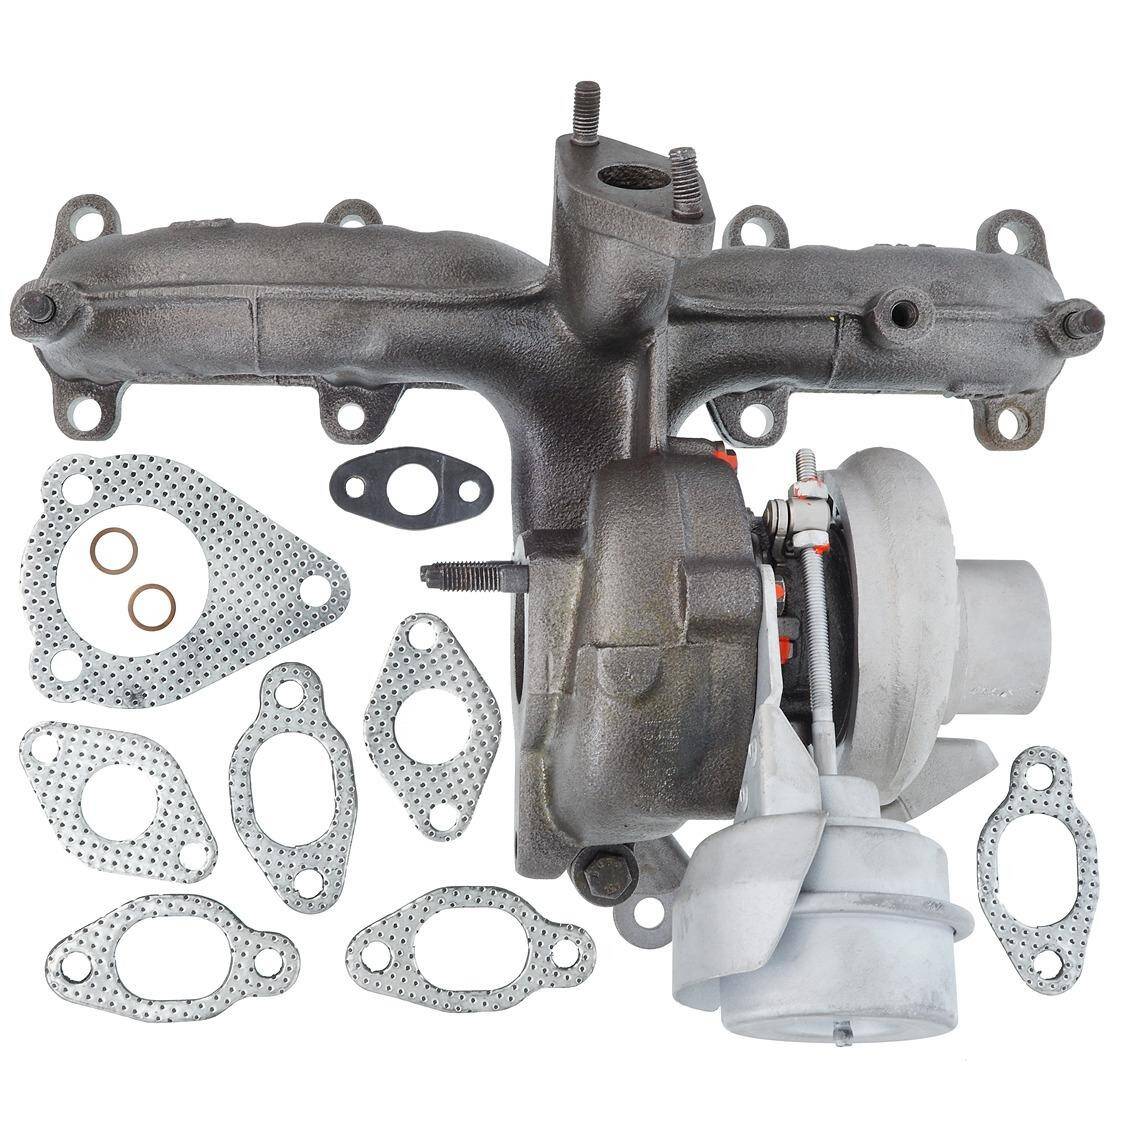 TURBOCHARGER TURBO REMANUFACTURED 54399700003 54399880003